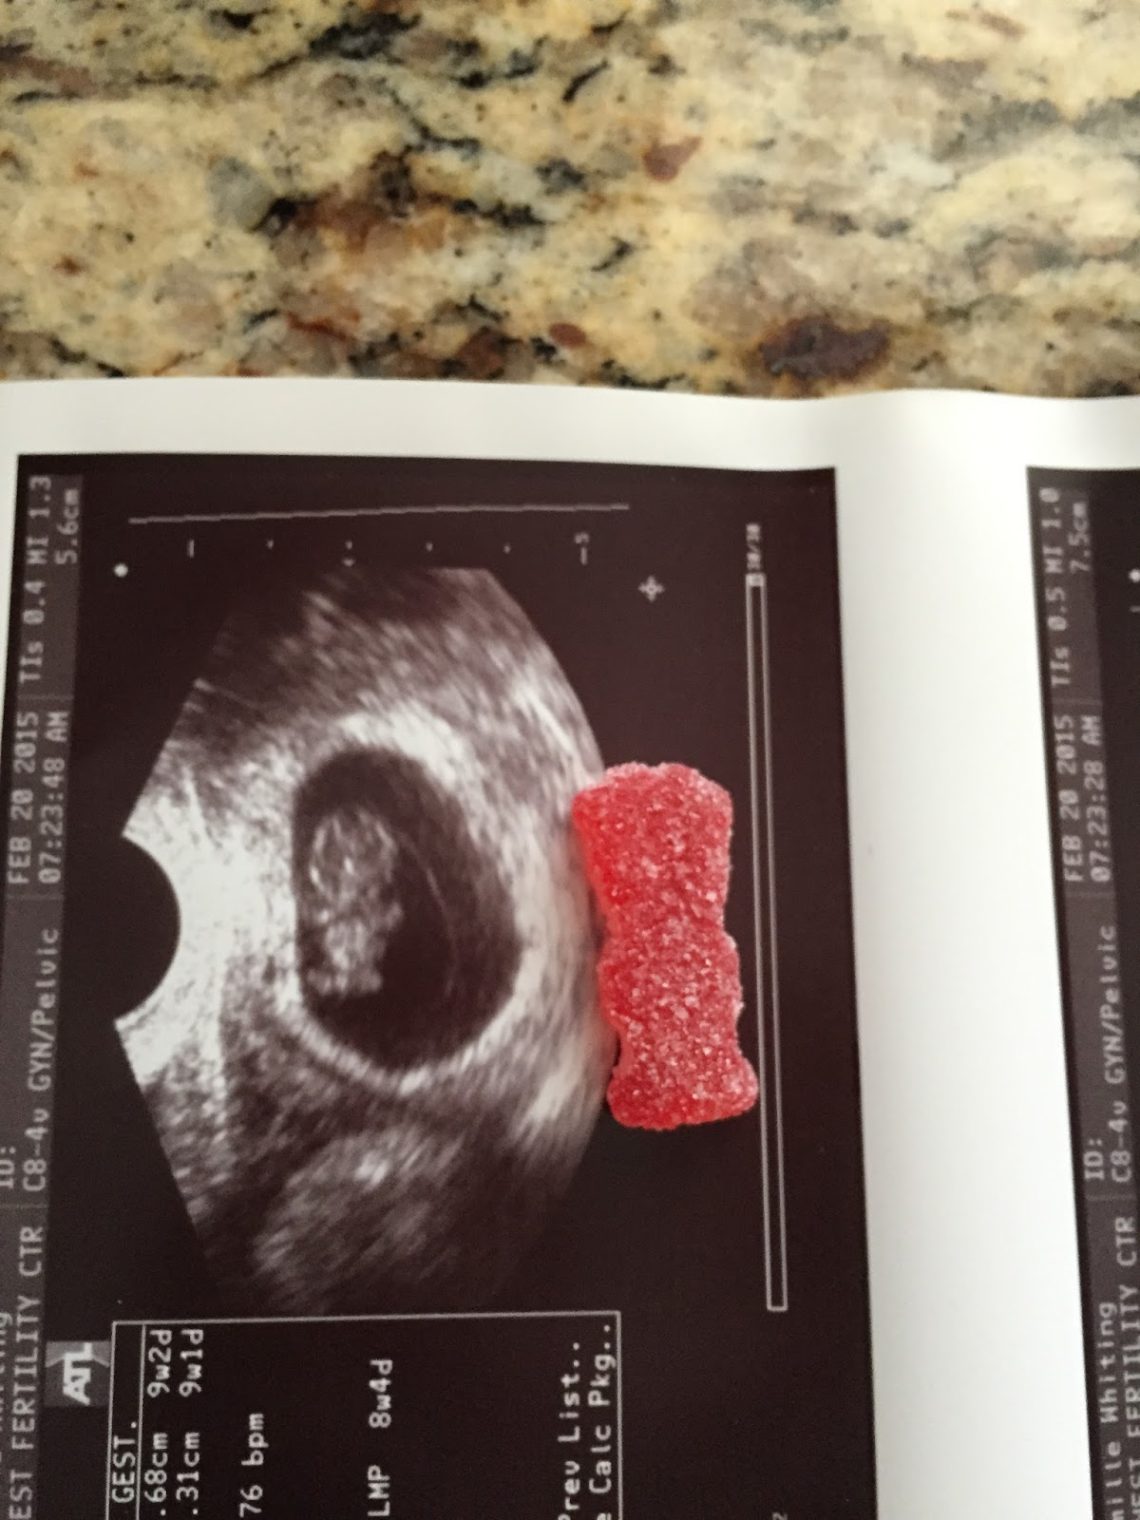 Ultrasound picture with a Sour Patch kid comparison. 